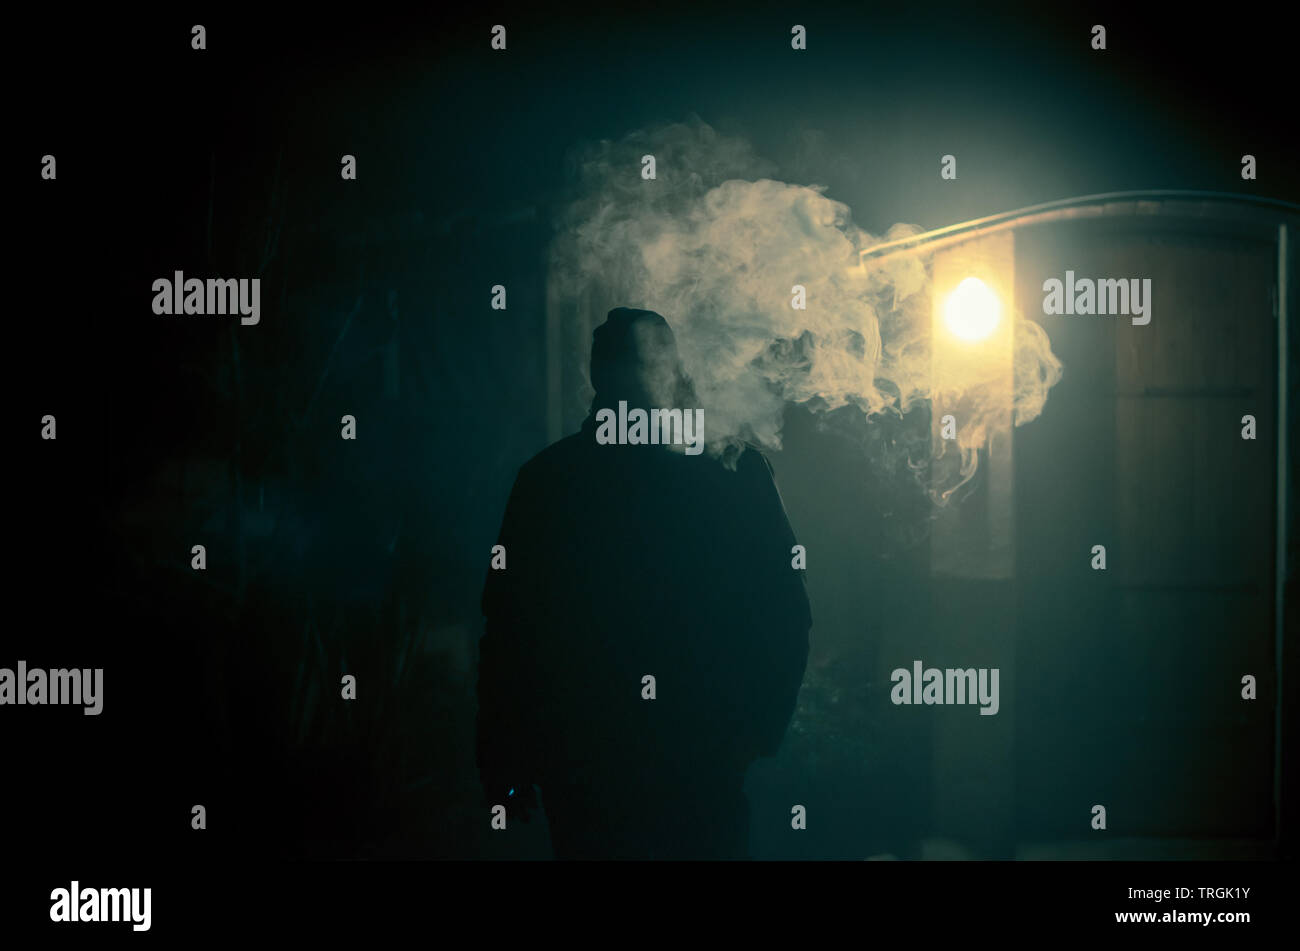 strange man smoking at night with big steam effect from the cigarette Stock Photo